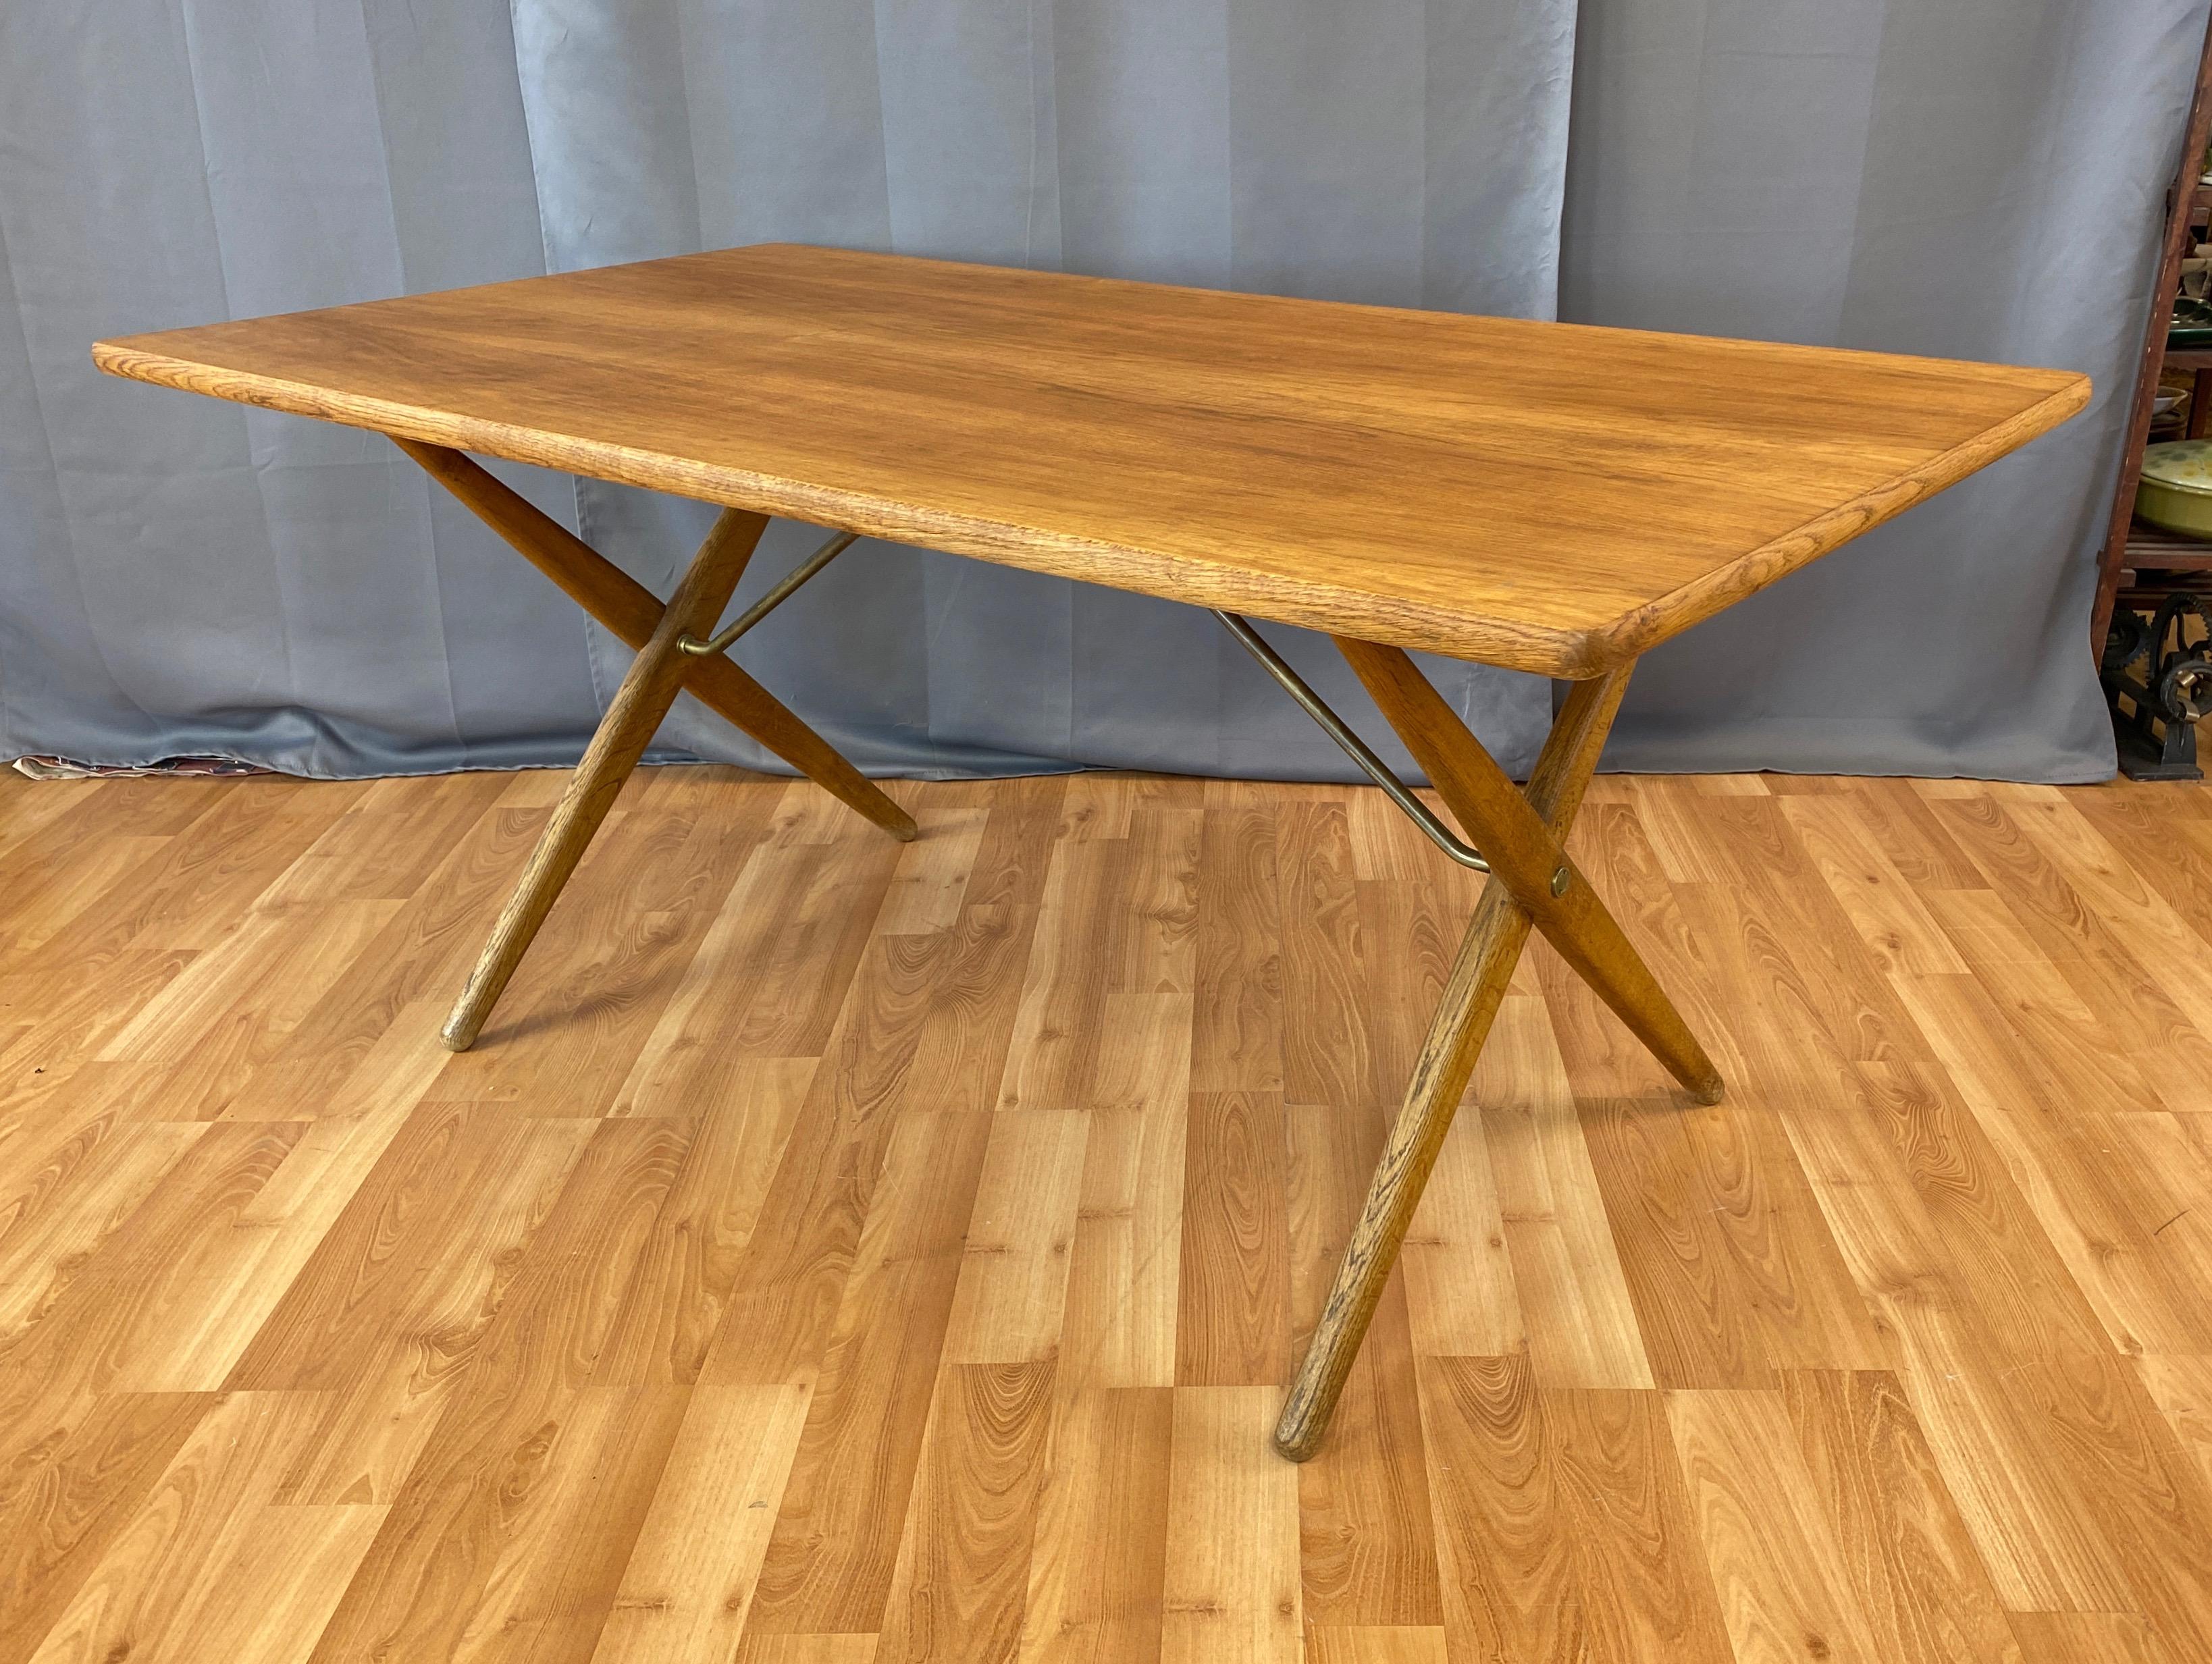 An AT-303 cross-leg oak dining table designed in 1955 by Hans J. Wegner and produced by Andreas Tuck.

Commonly referred to as the “Sawhorse” table, this iconic Wegner piece features distinctive X-shaped solid oak legs with a handsomely figured